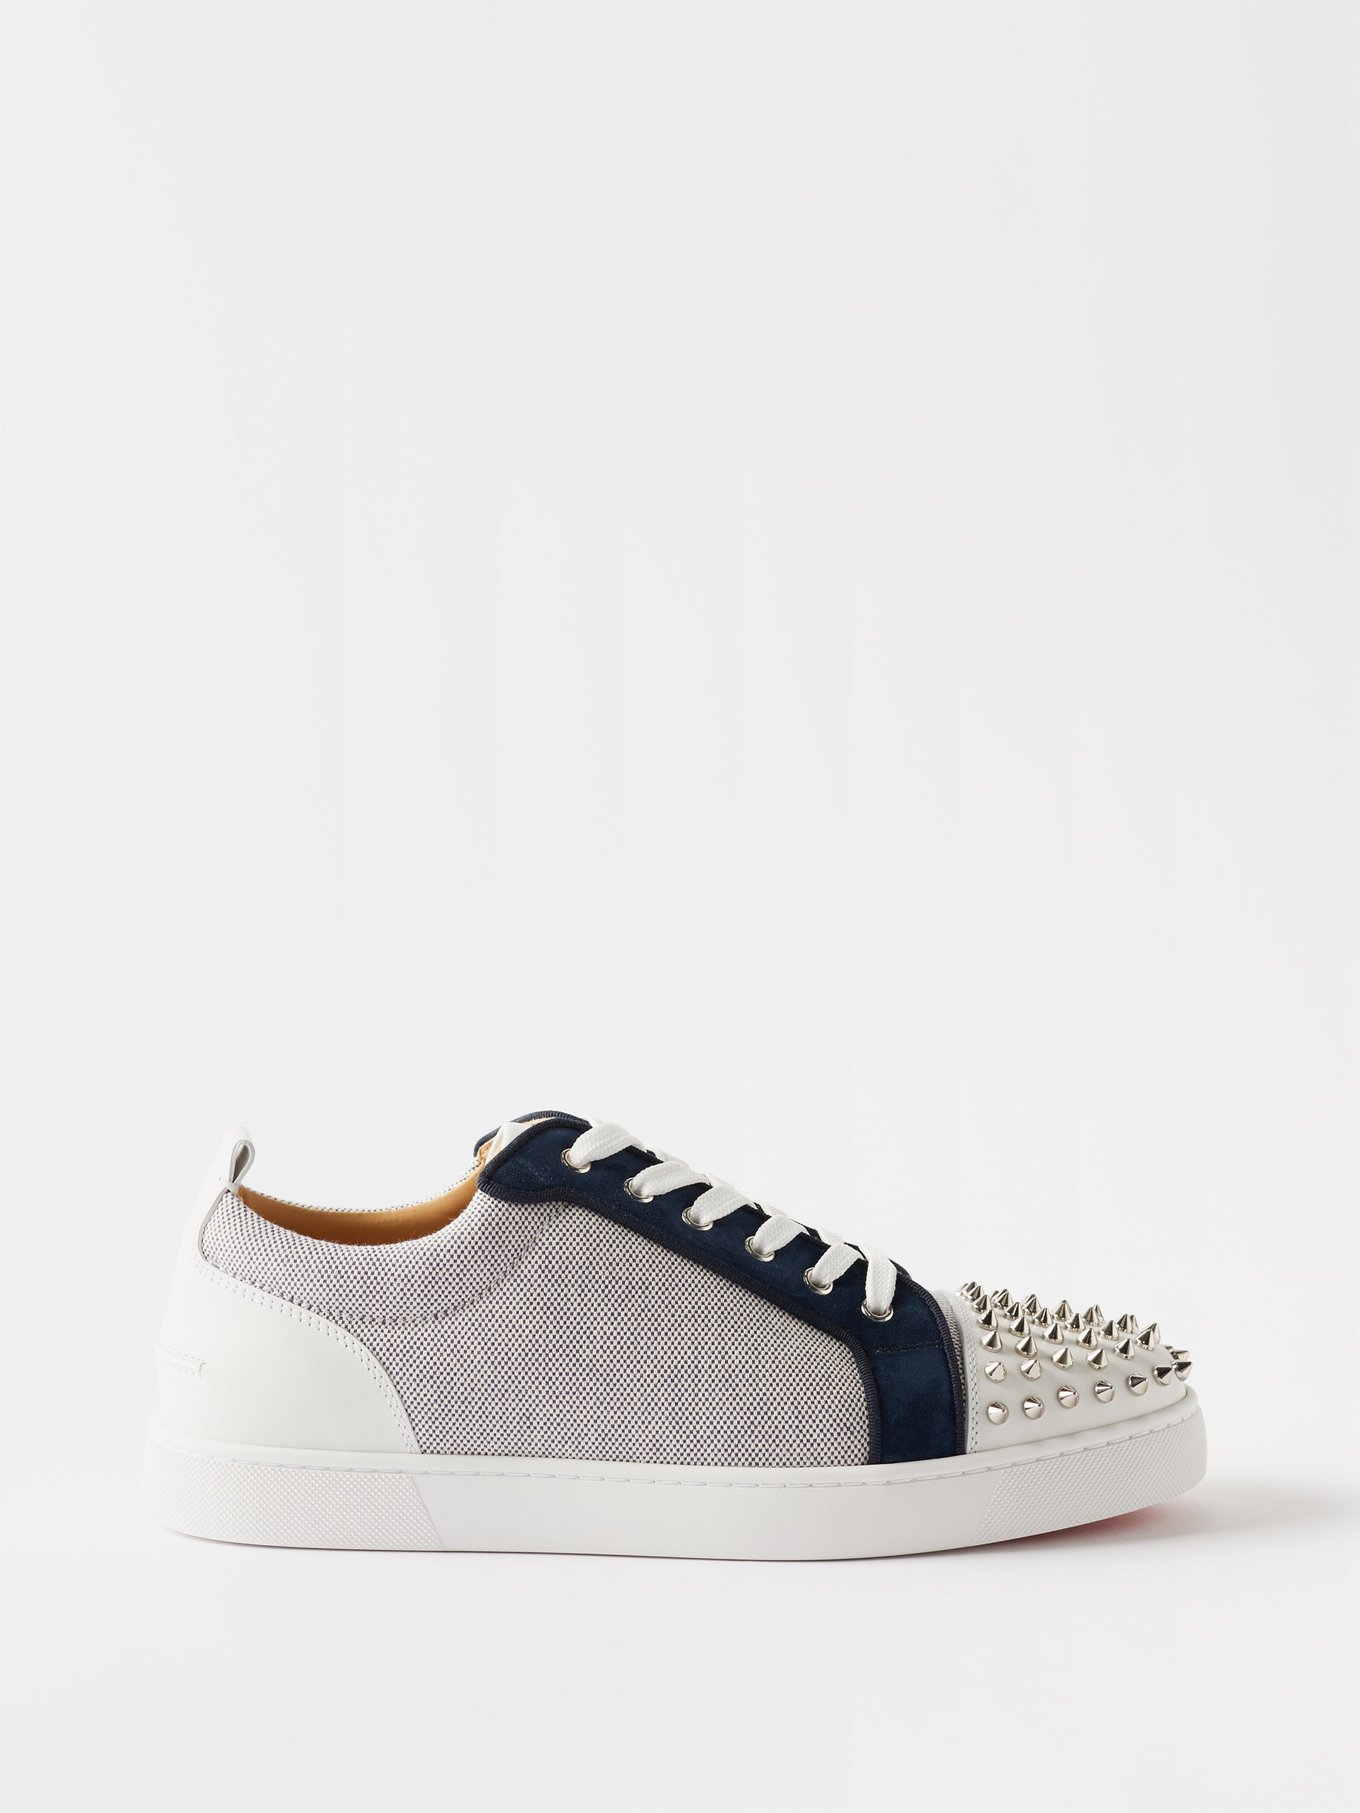 Louis junior spike low trainers Christian Louboutin Grey size 40